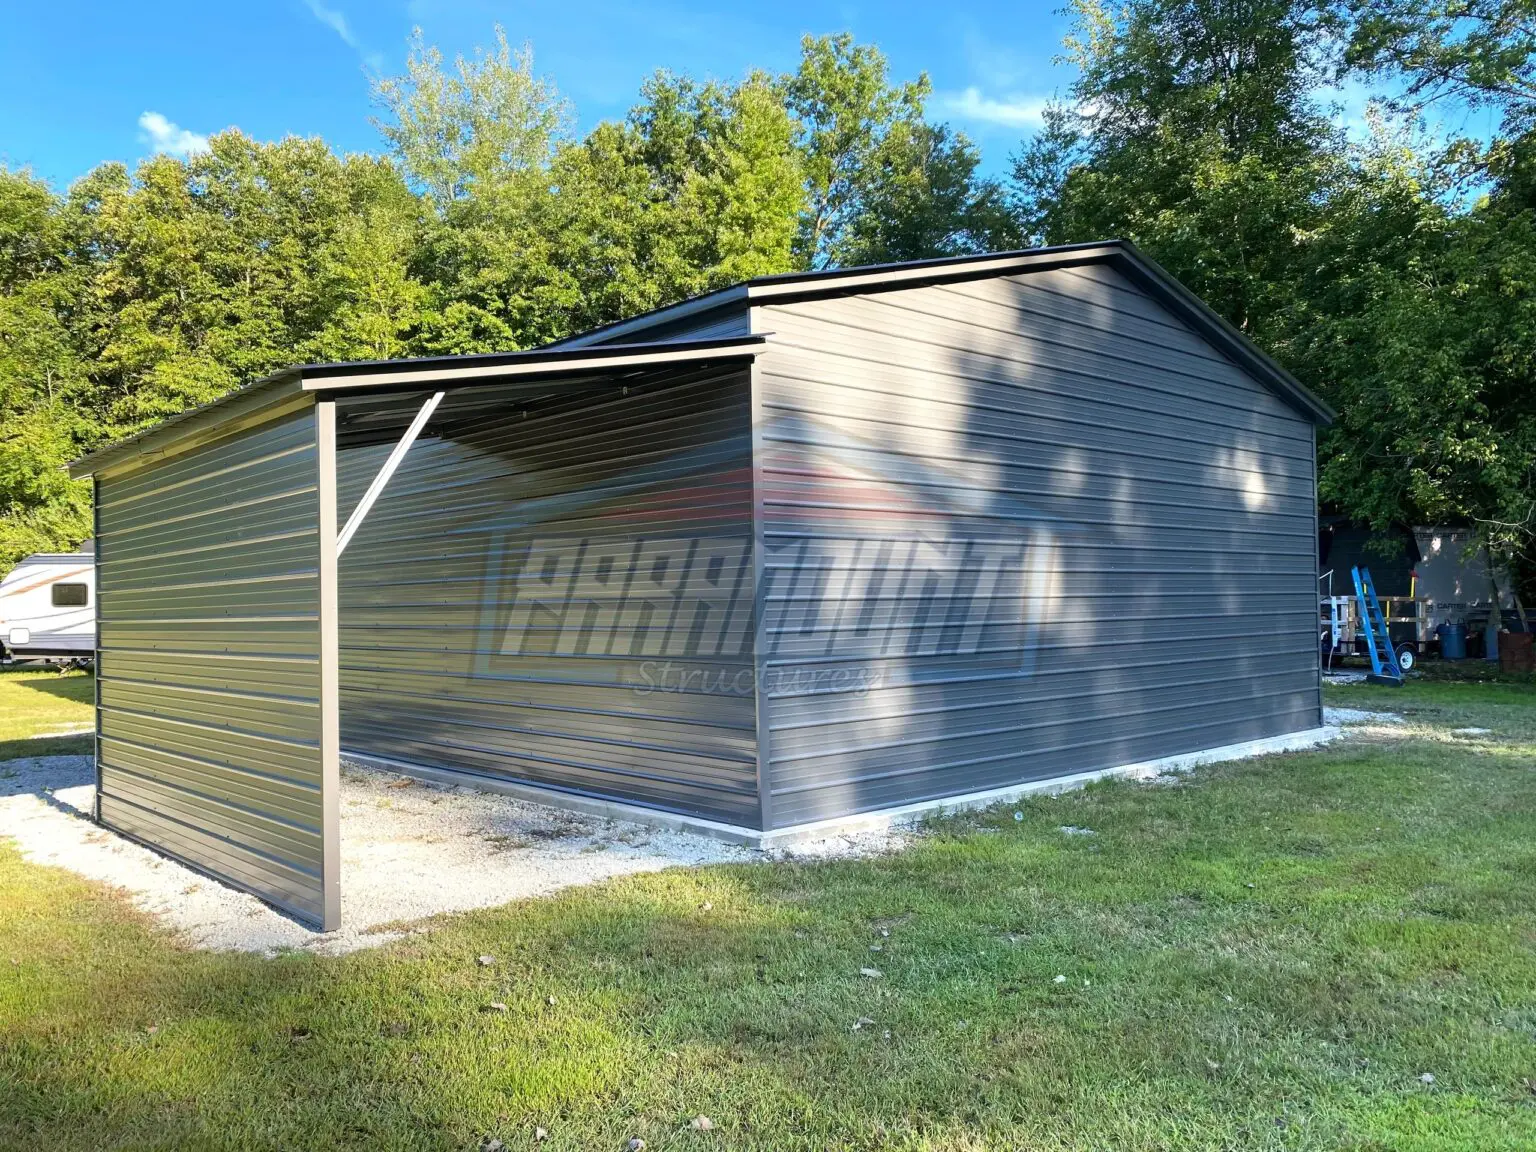 A gray metal garage with a black roof.